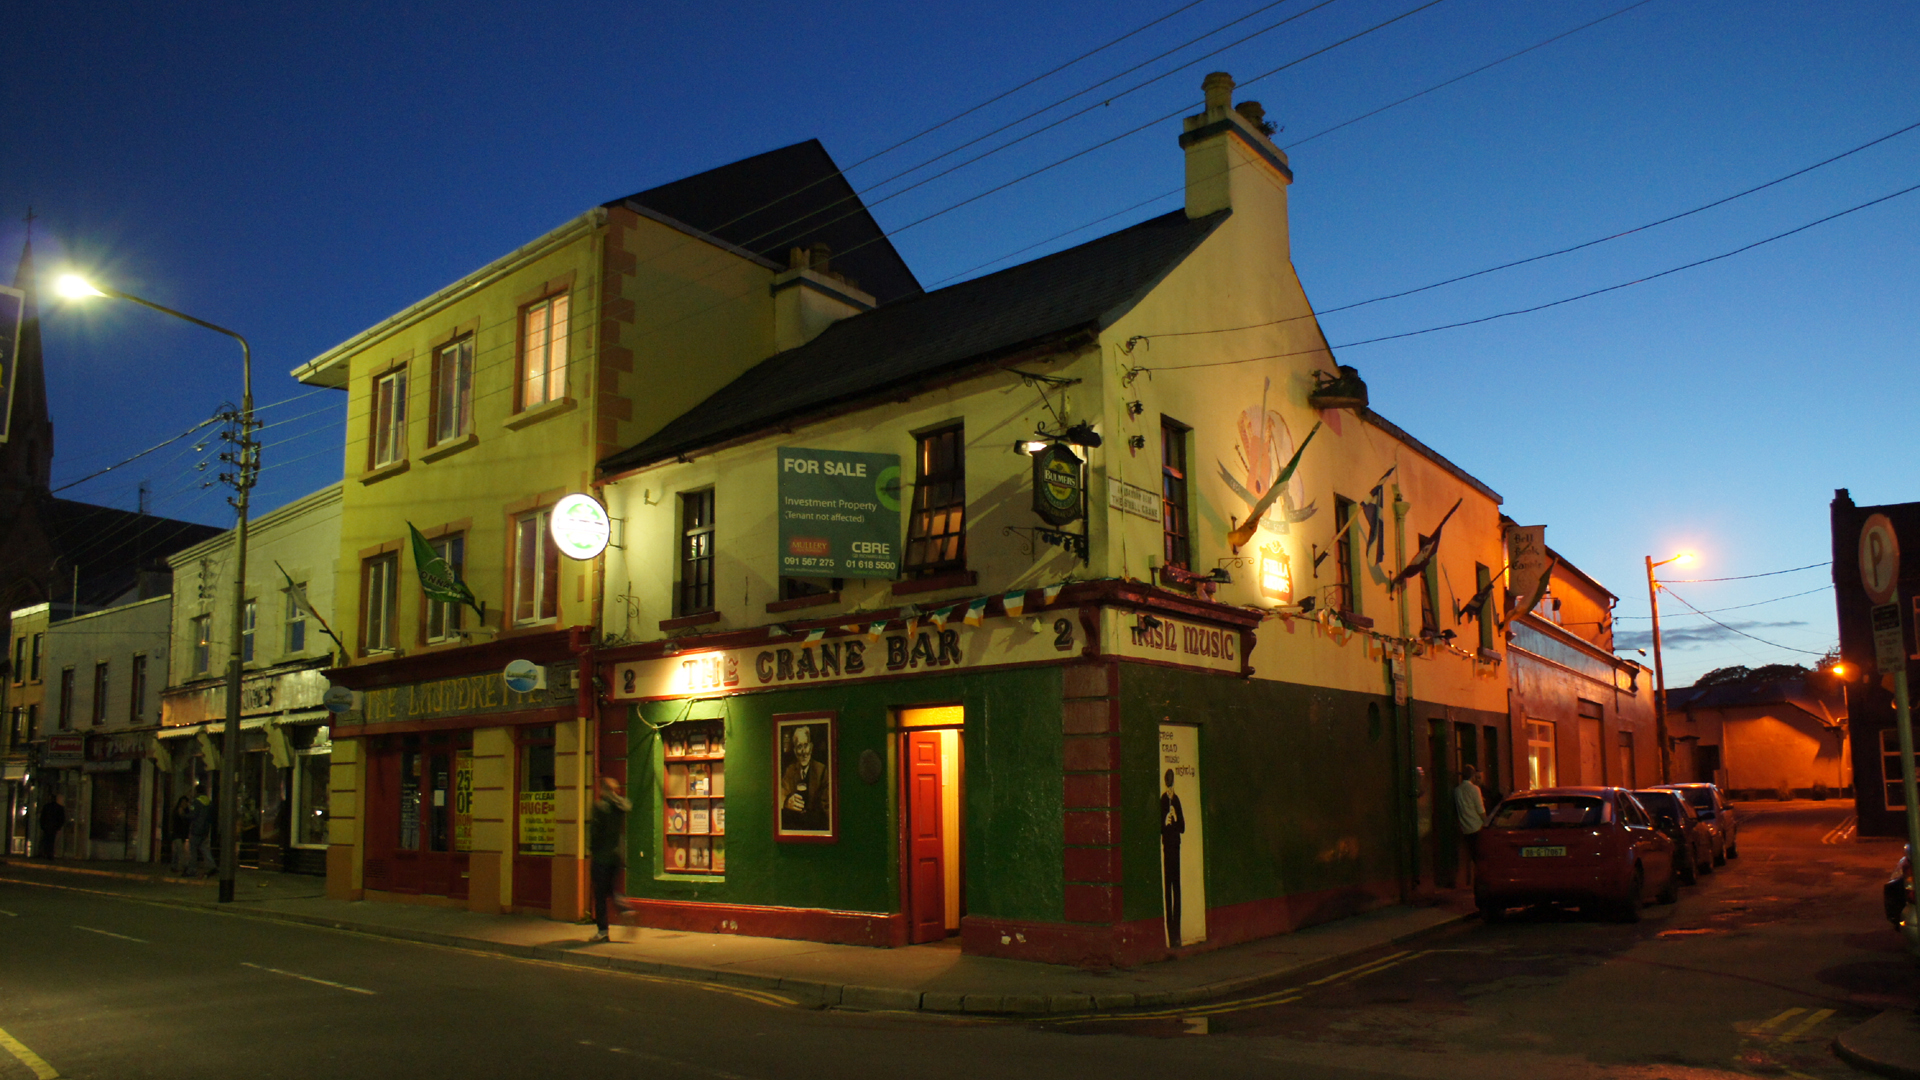 Irland 02: Pub in Galway